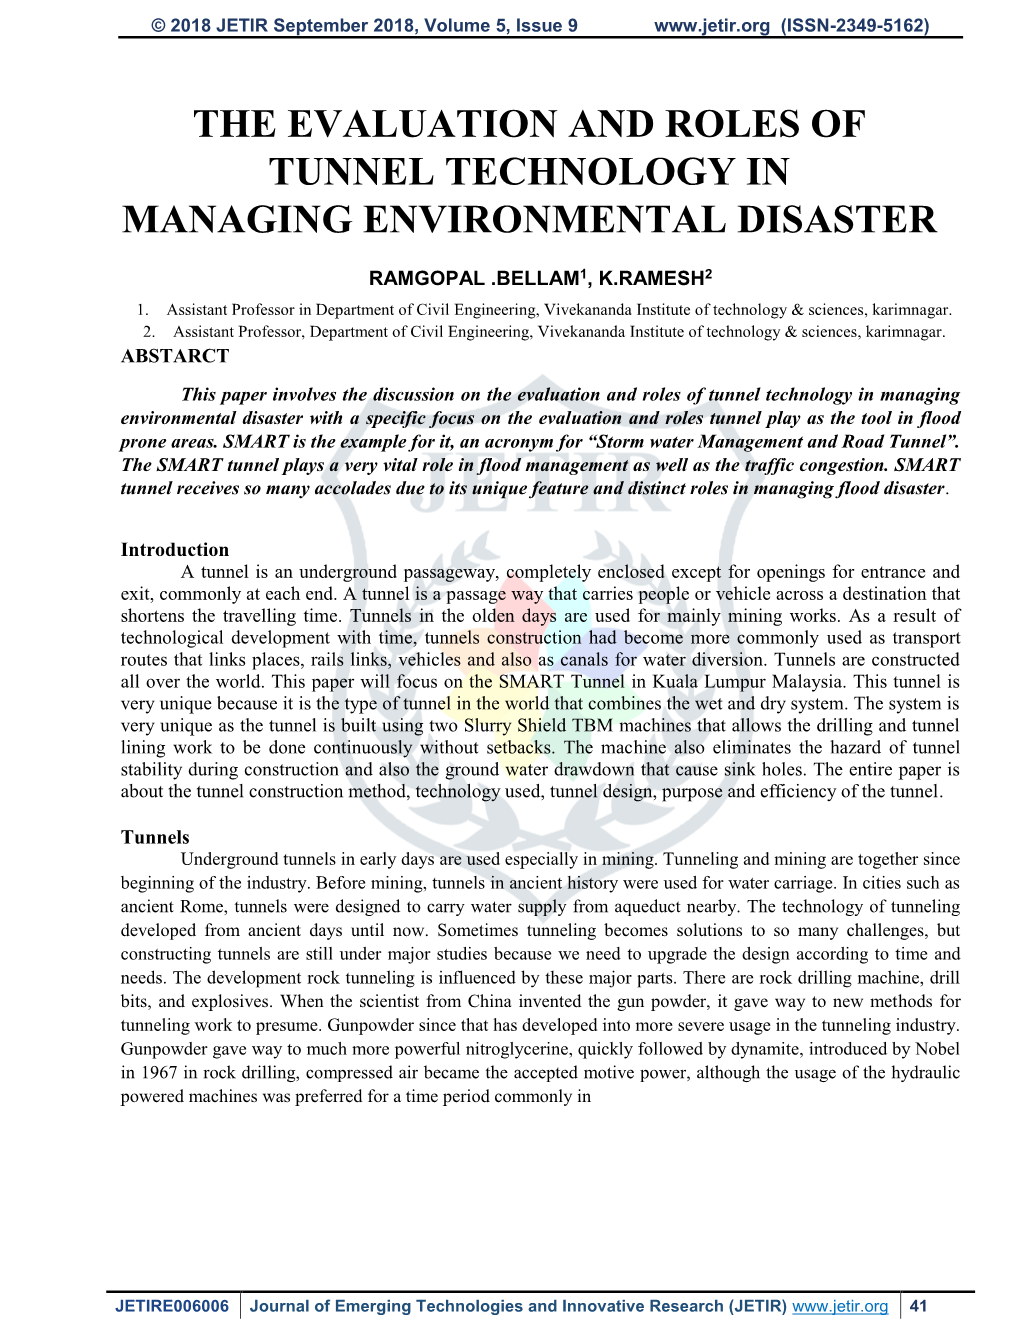 The Evaluation and Roles of Tunnel Technology in Managing Environmental Disaster